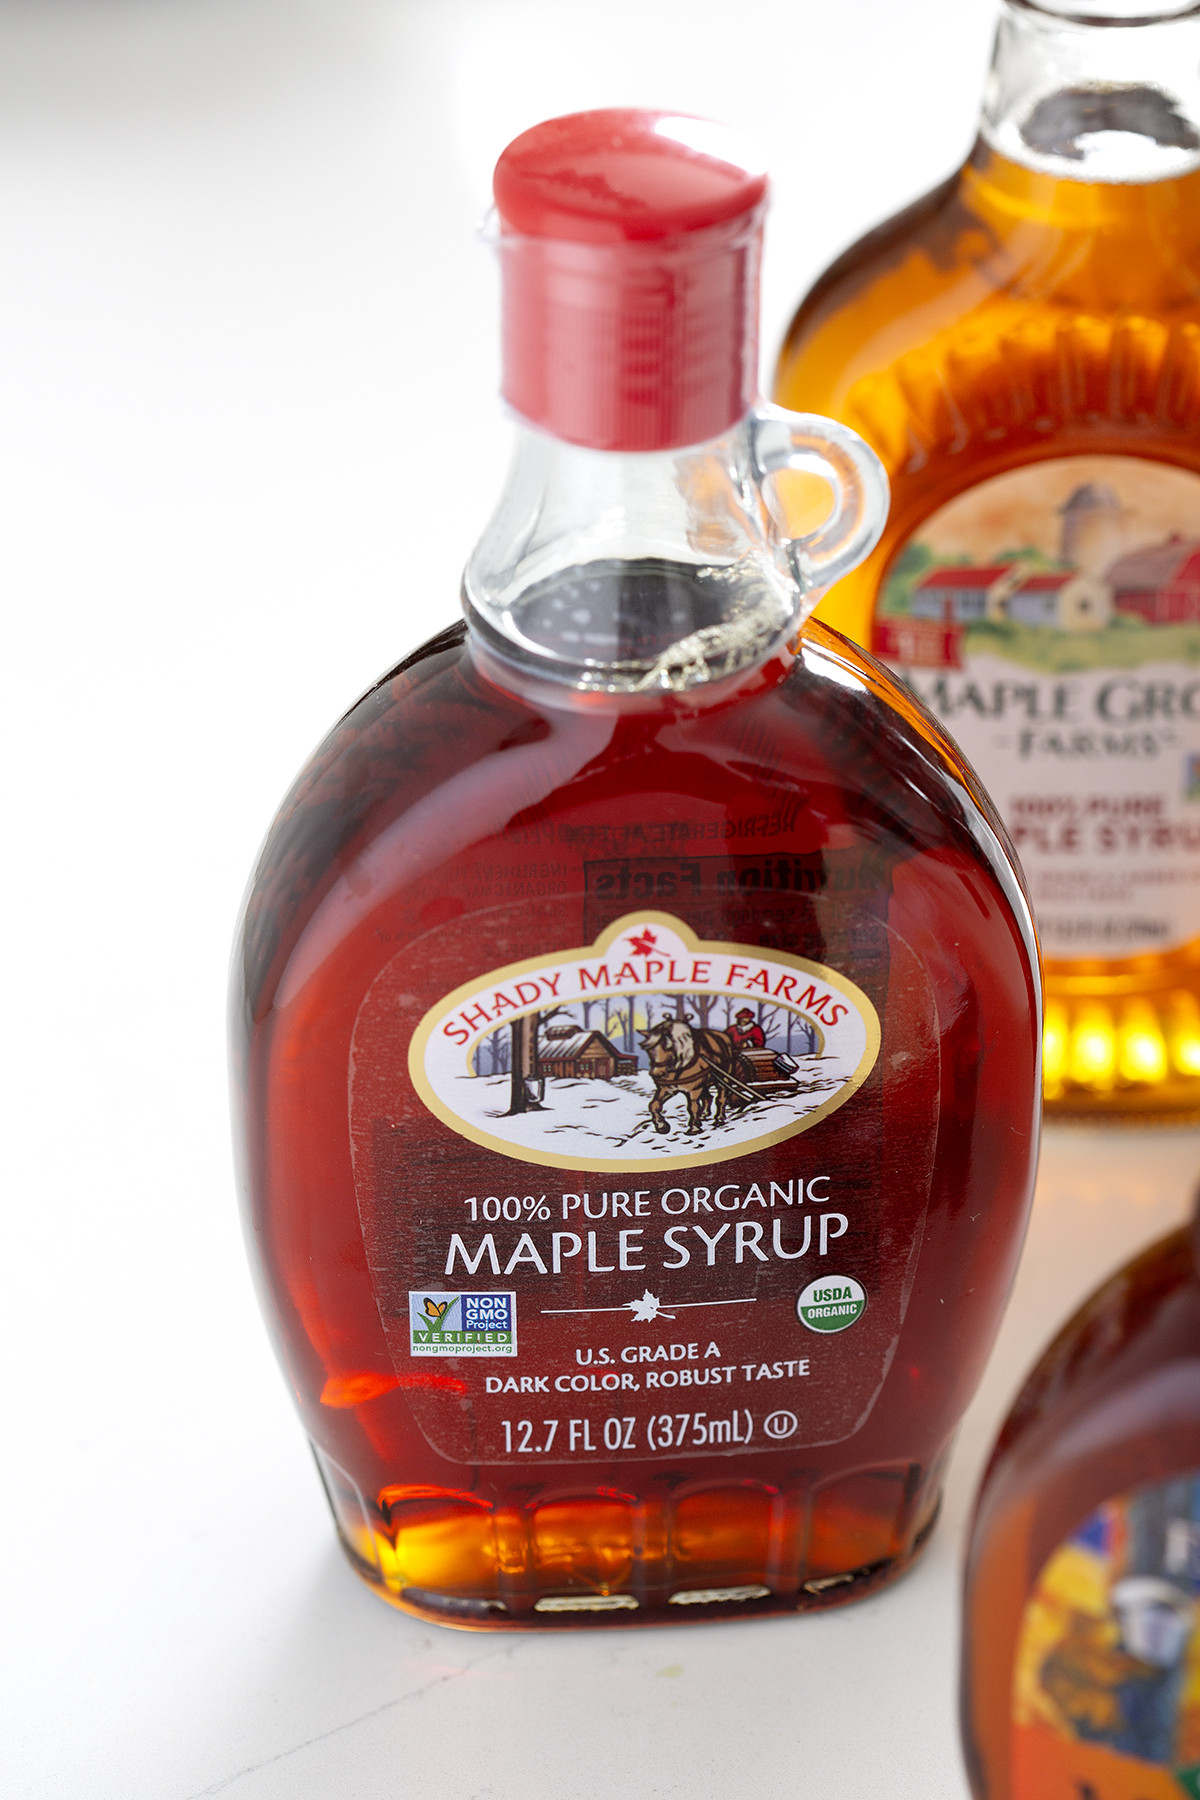 bottle of shady maple farms maple syrup